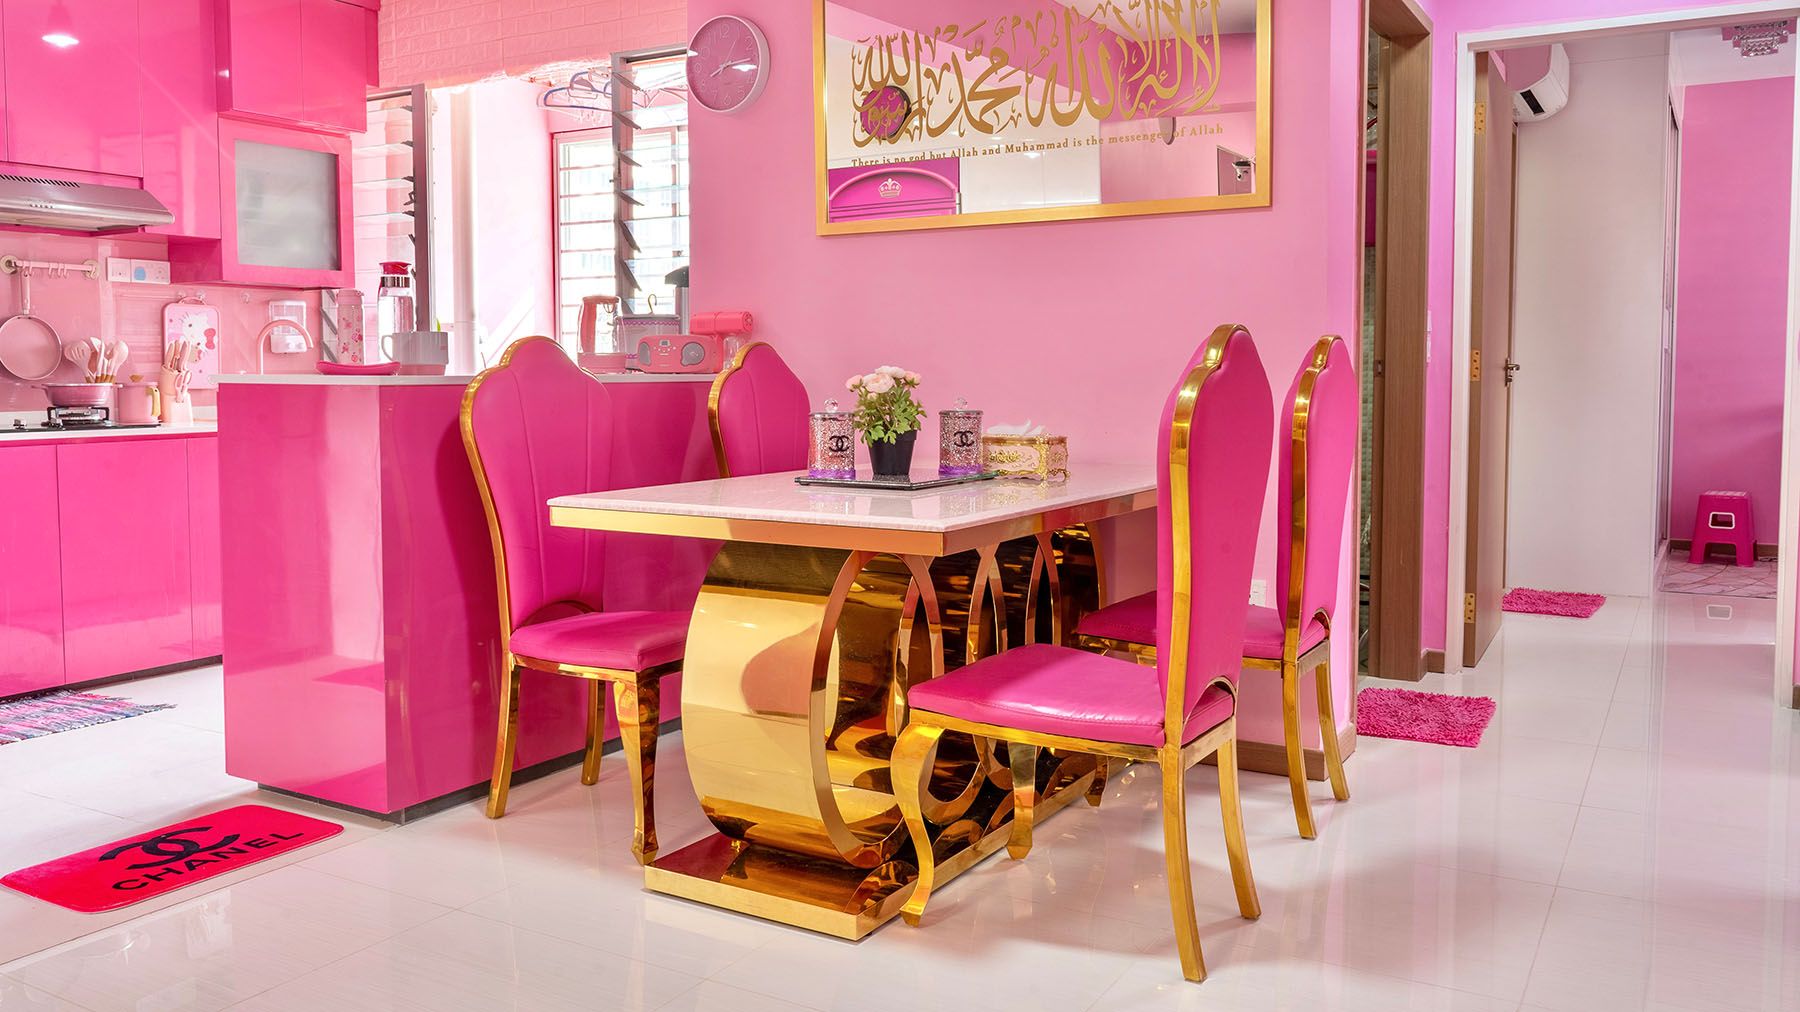 Home Diaries: A Tour into an All Pink Interior